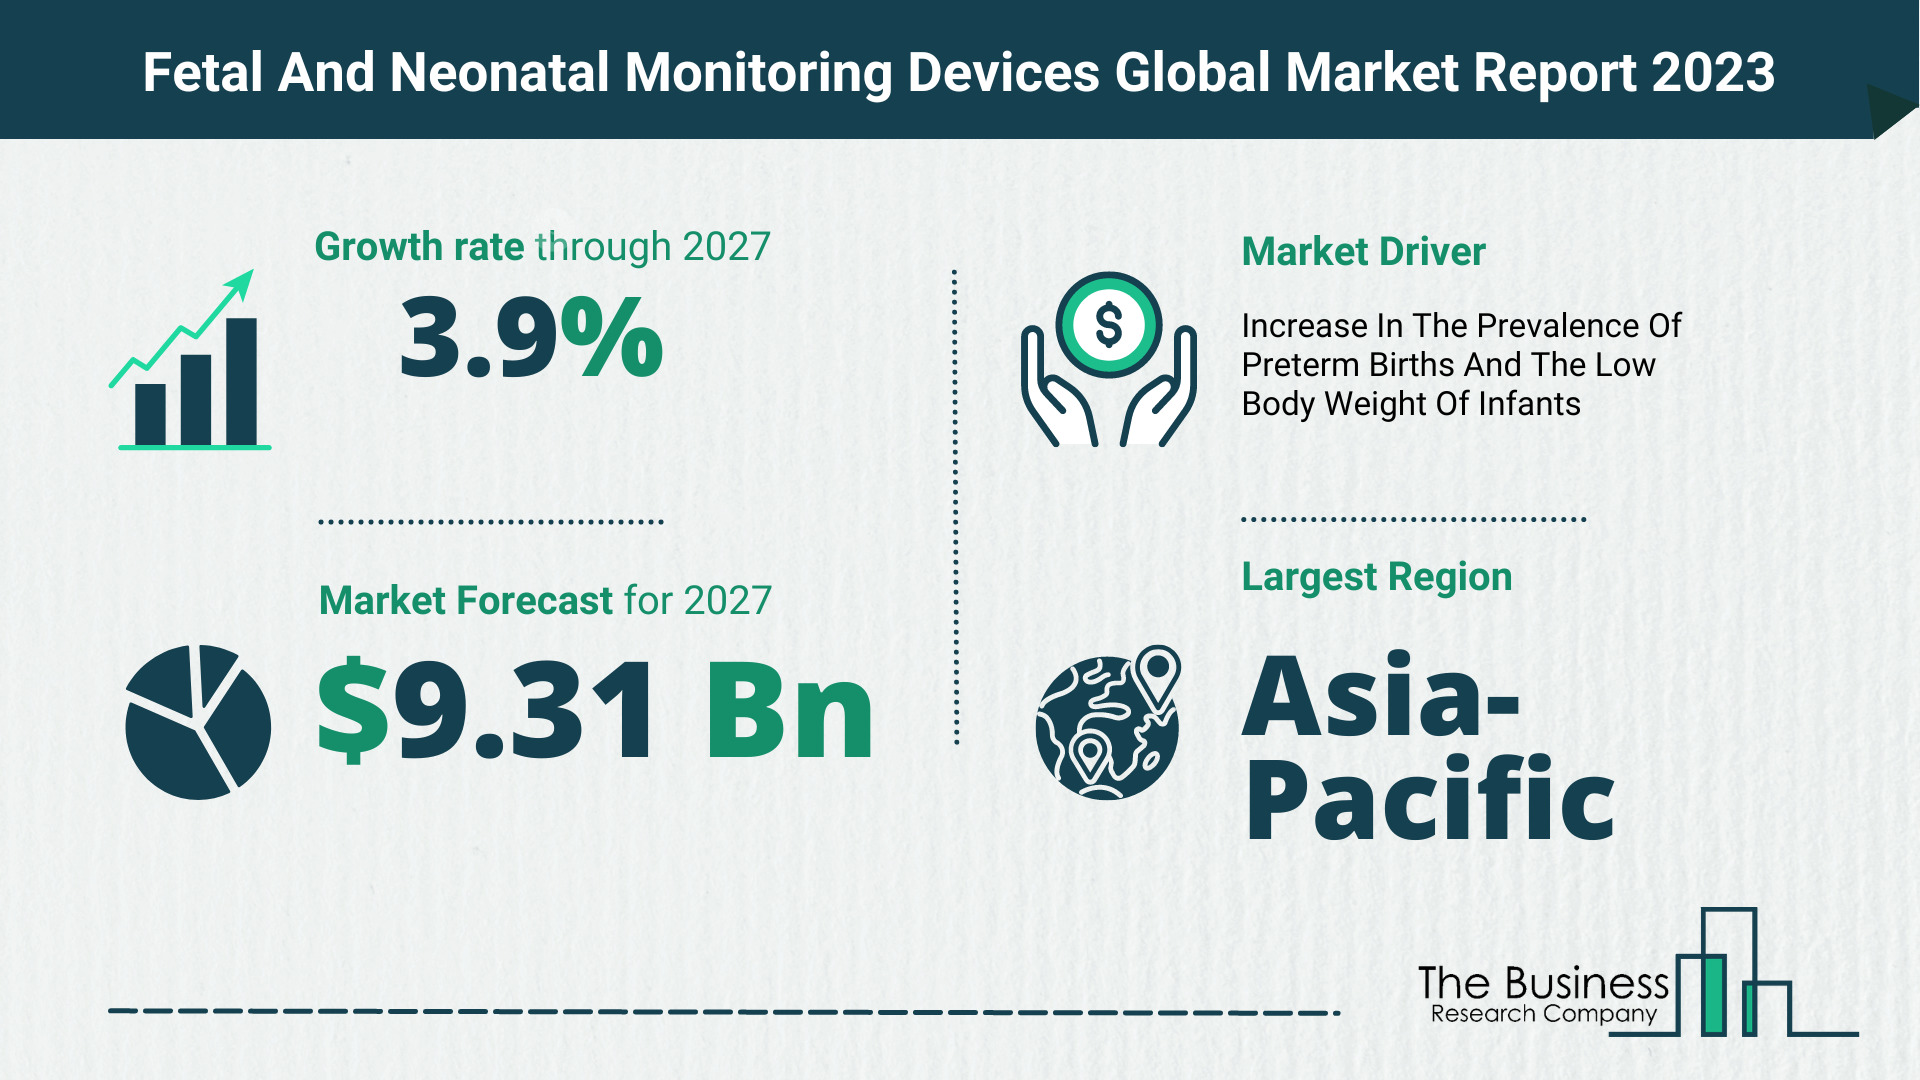 Global Fetal And Neonatal Monitoring Devices Market Size